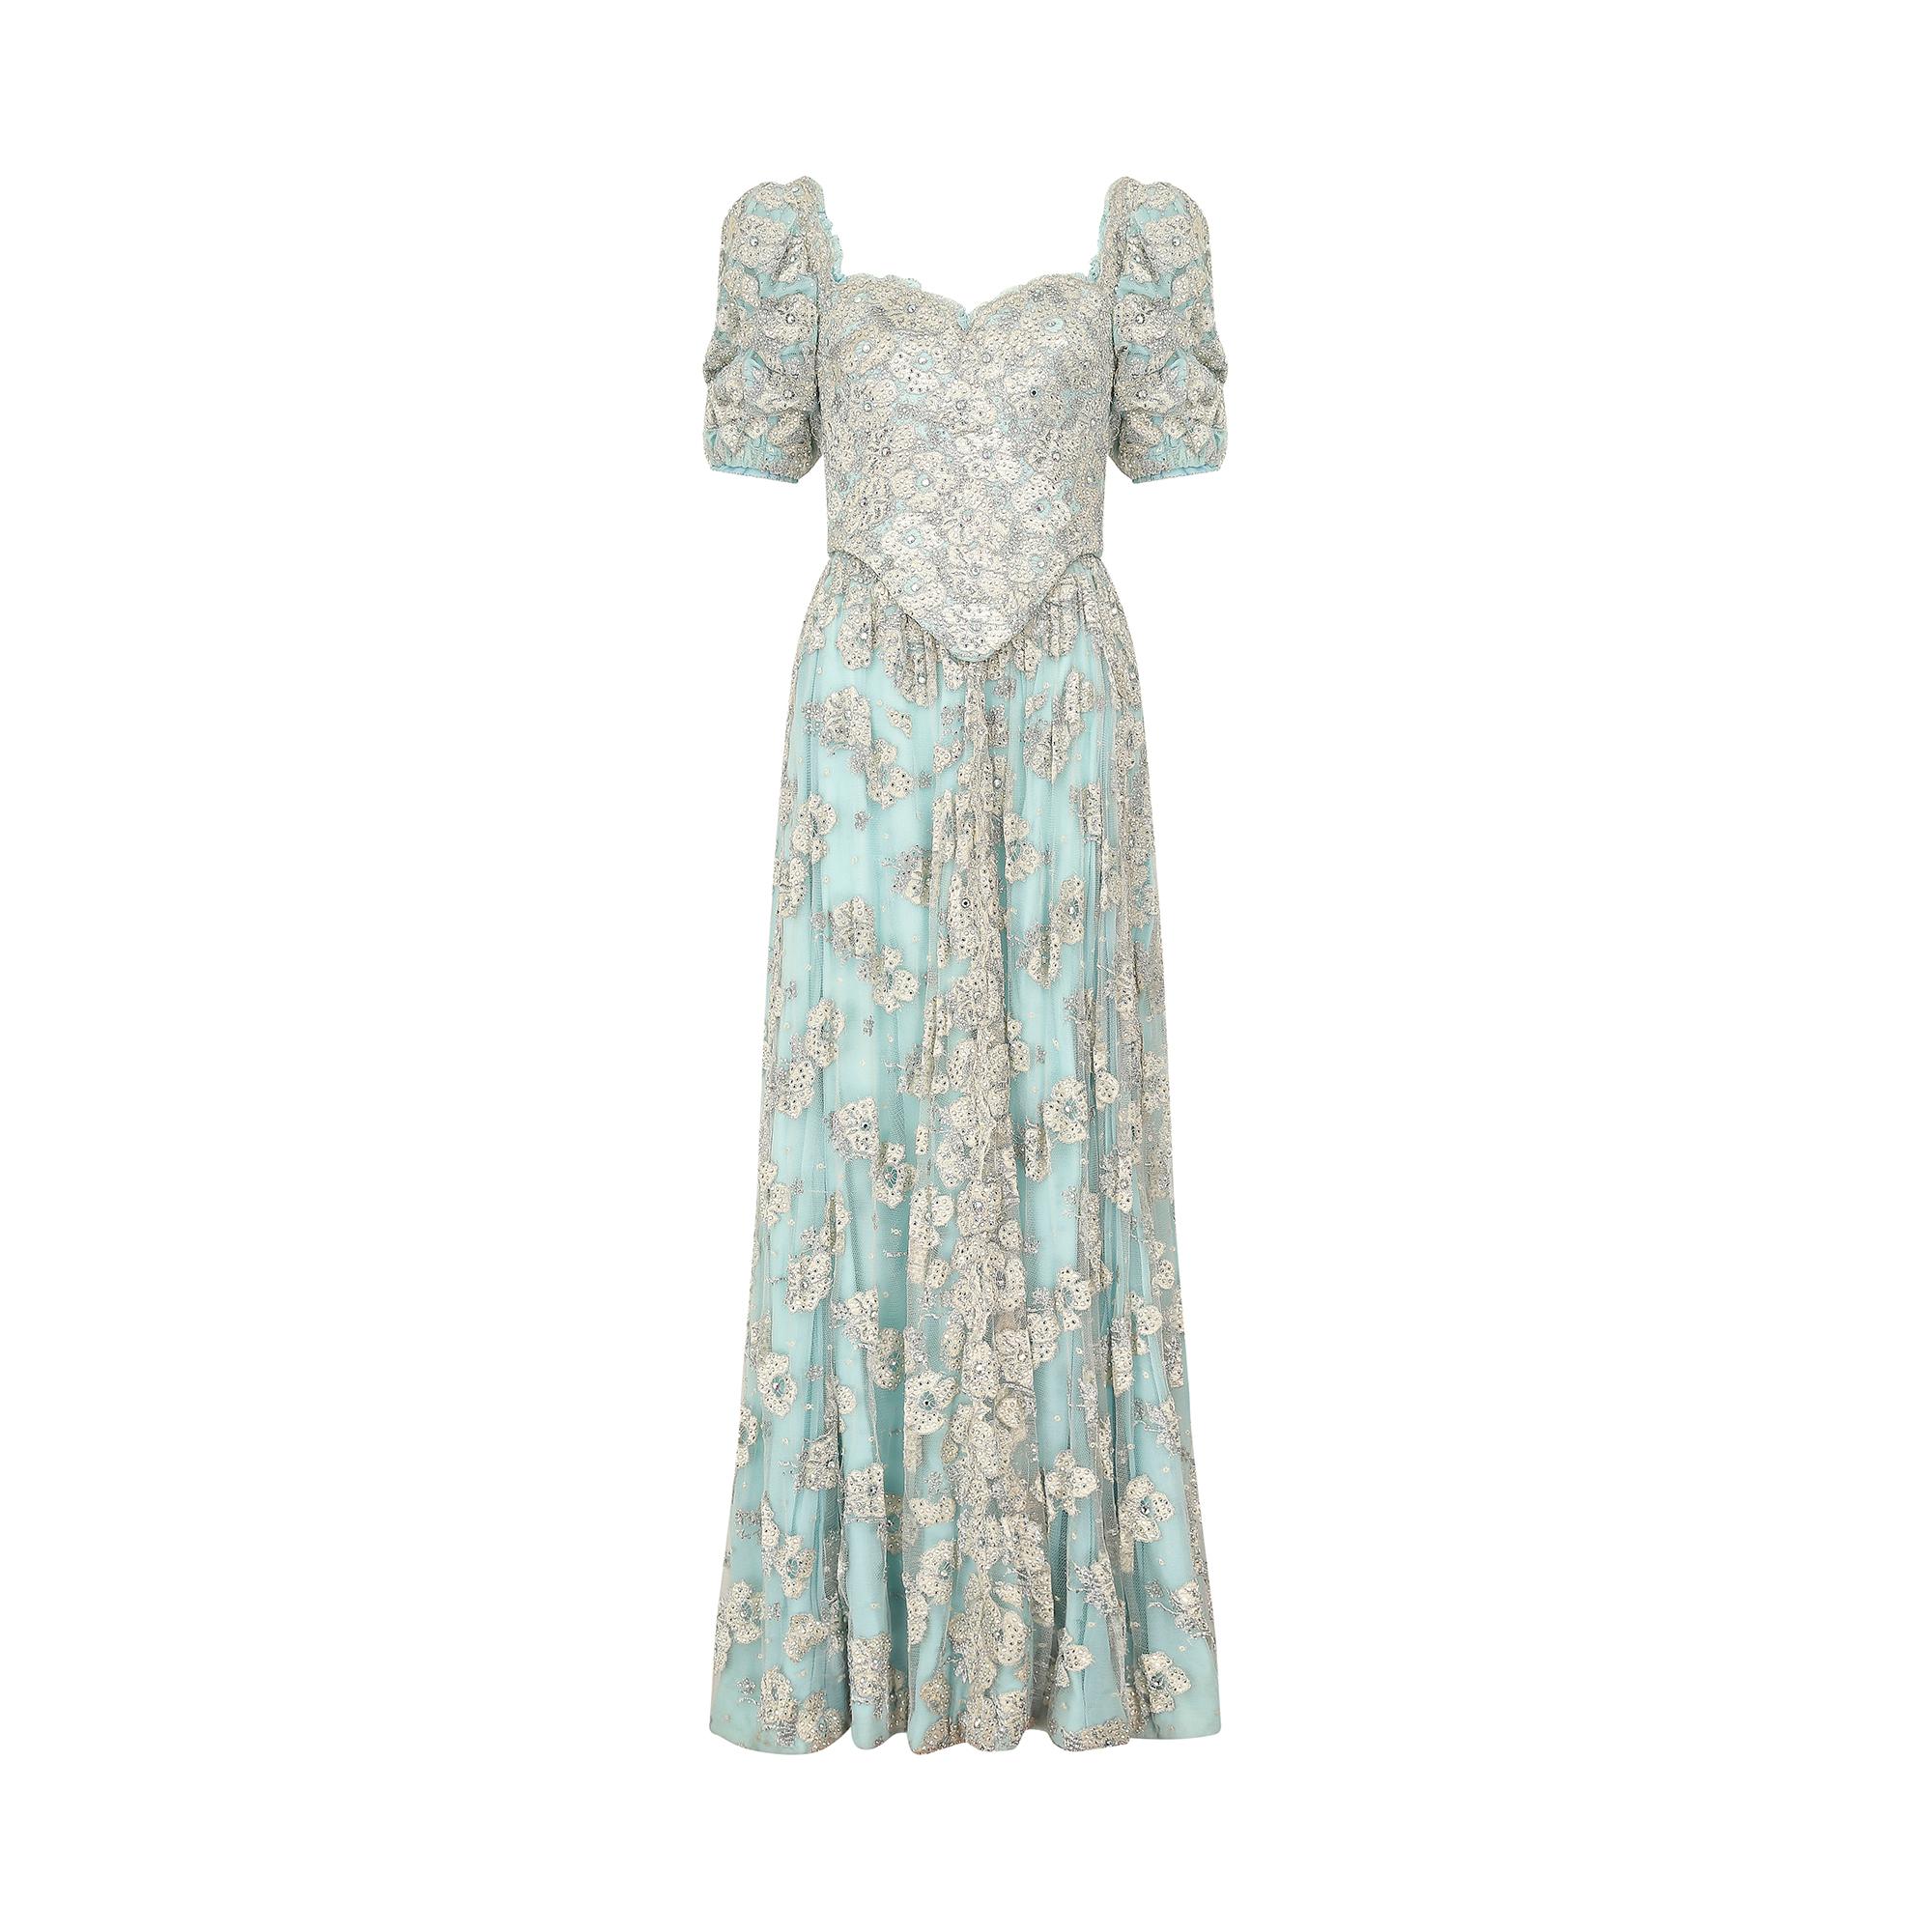 This magnificent 1990s bespoke made embellished lace and crystal dress is a fairytale dream.  The top section features a heavily crystal studded lace and turquoise bodice which has an incredible internal structure, made up of heavy boning, shaped